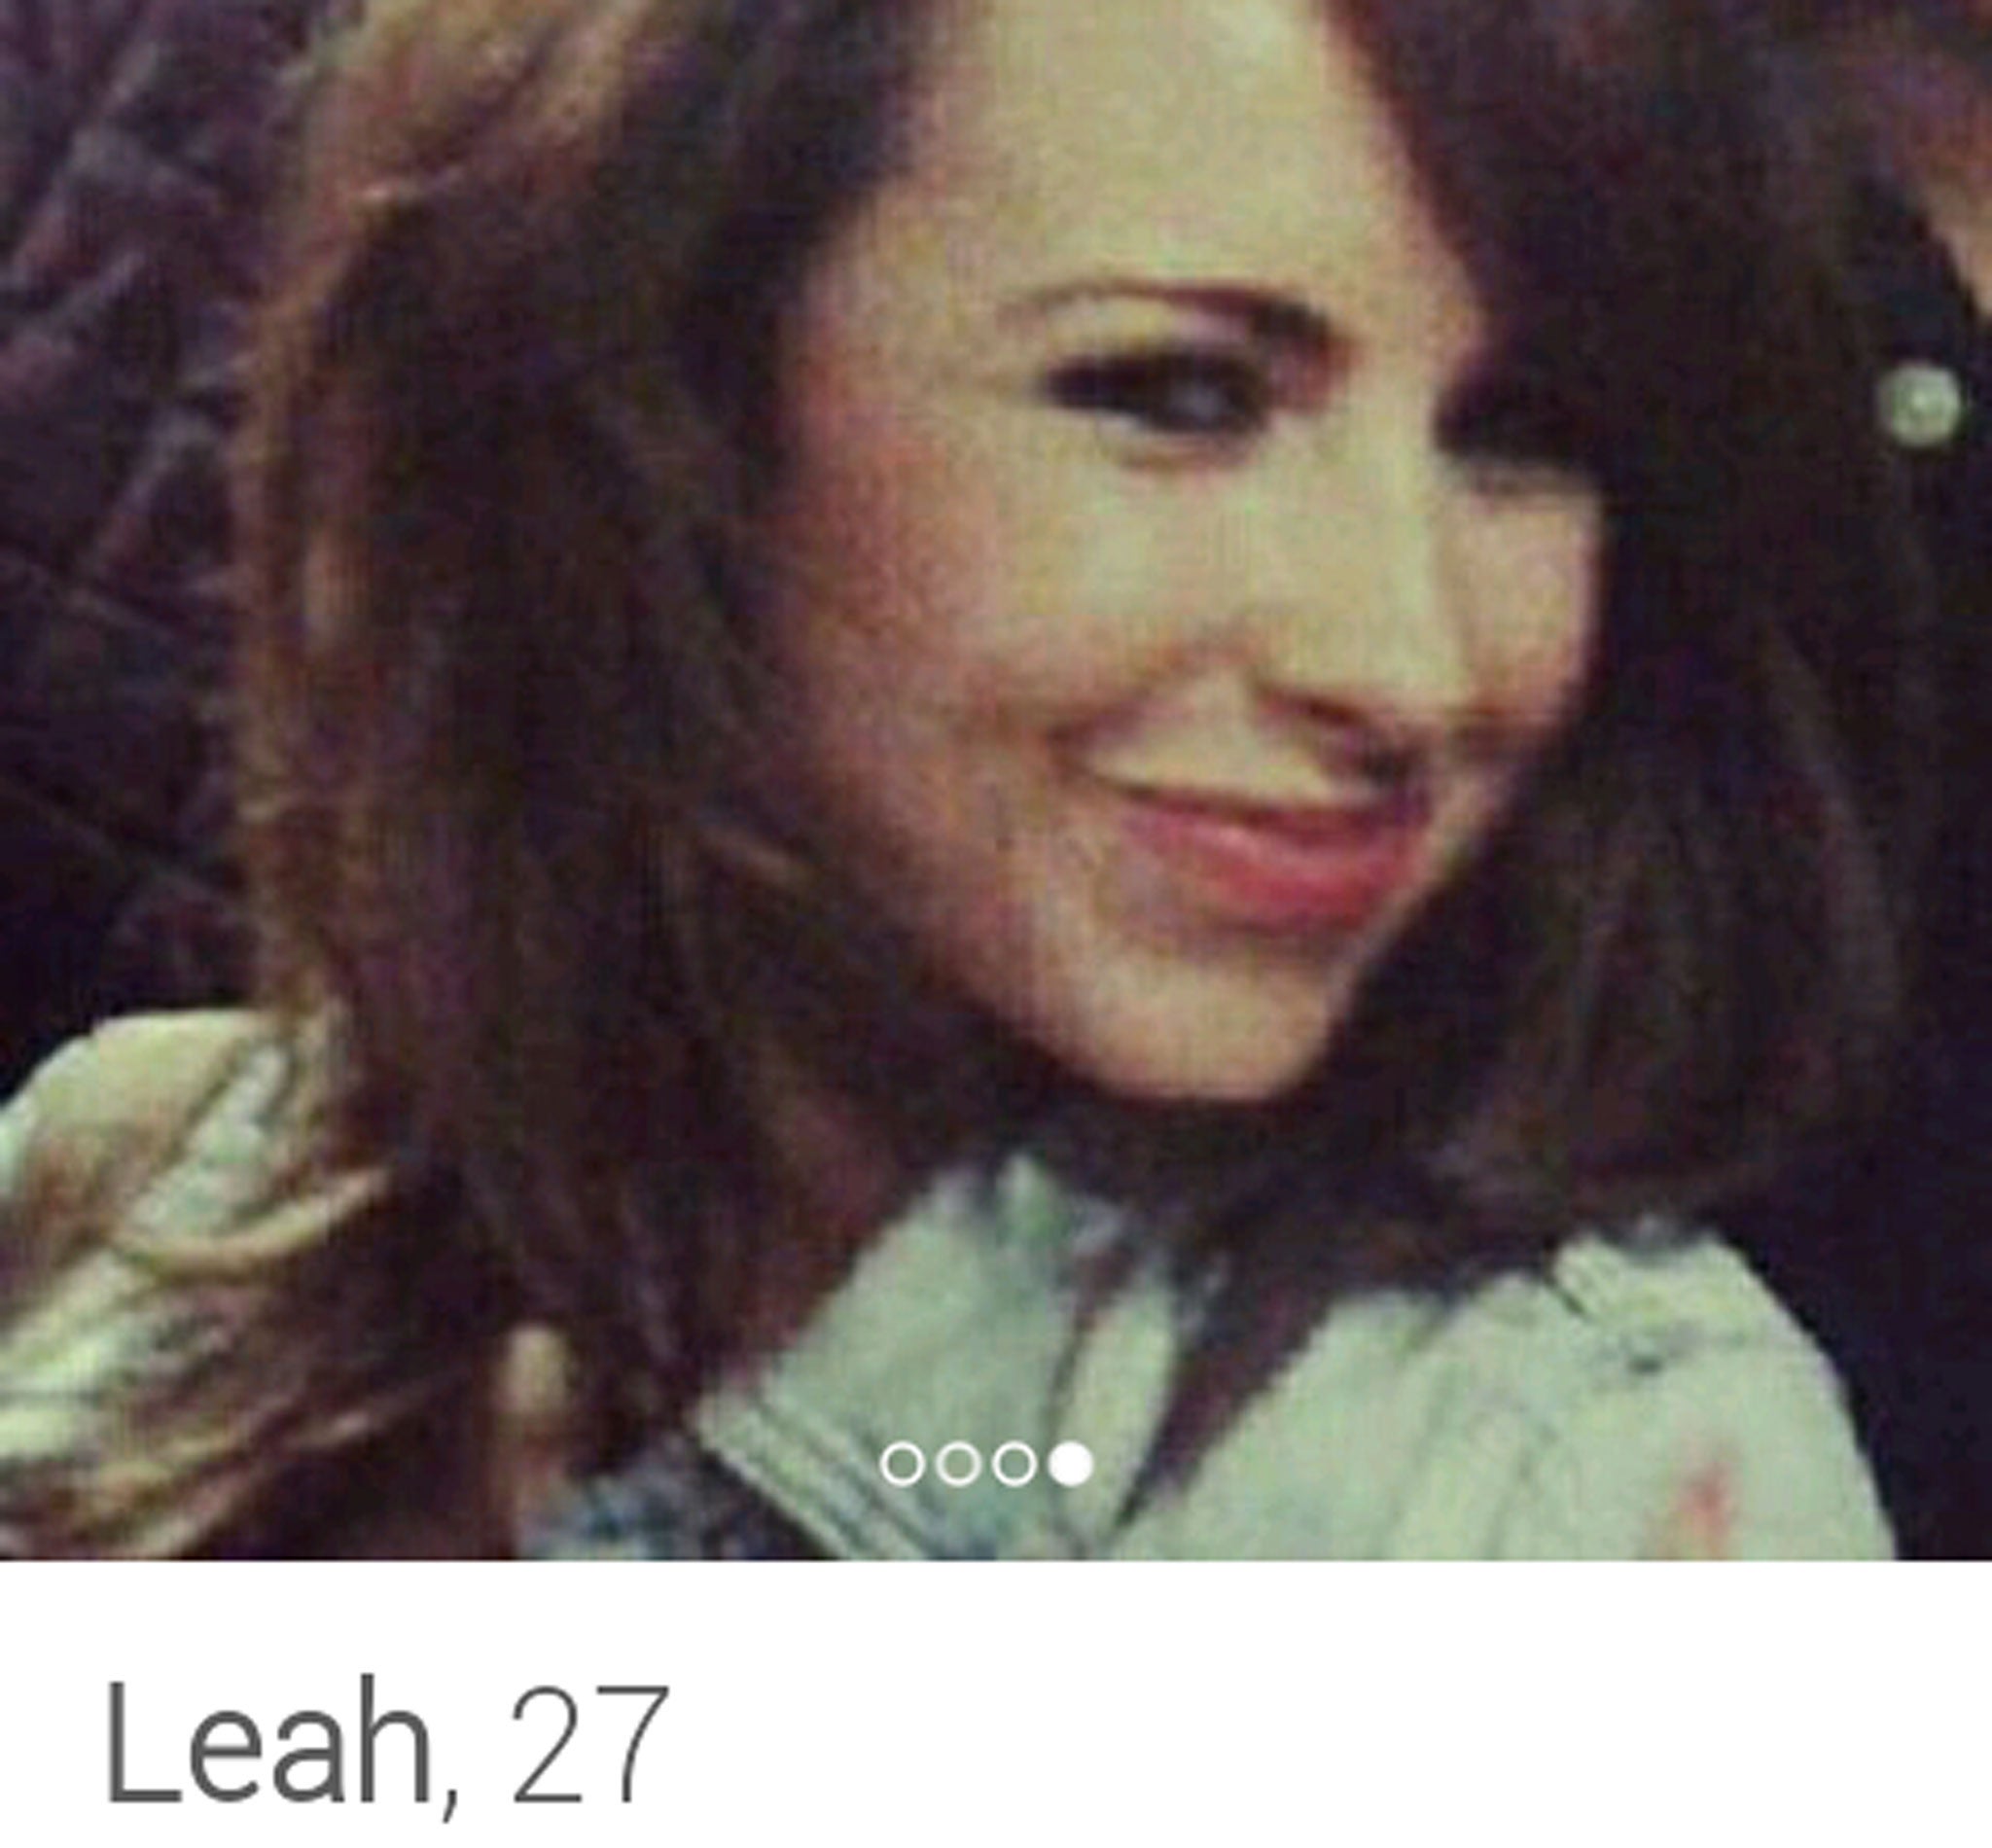 Have you seen this woman on Tinder? Swipe right to find out more...